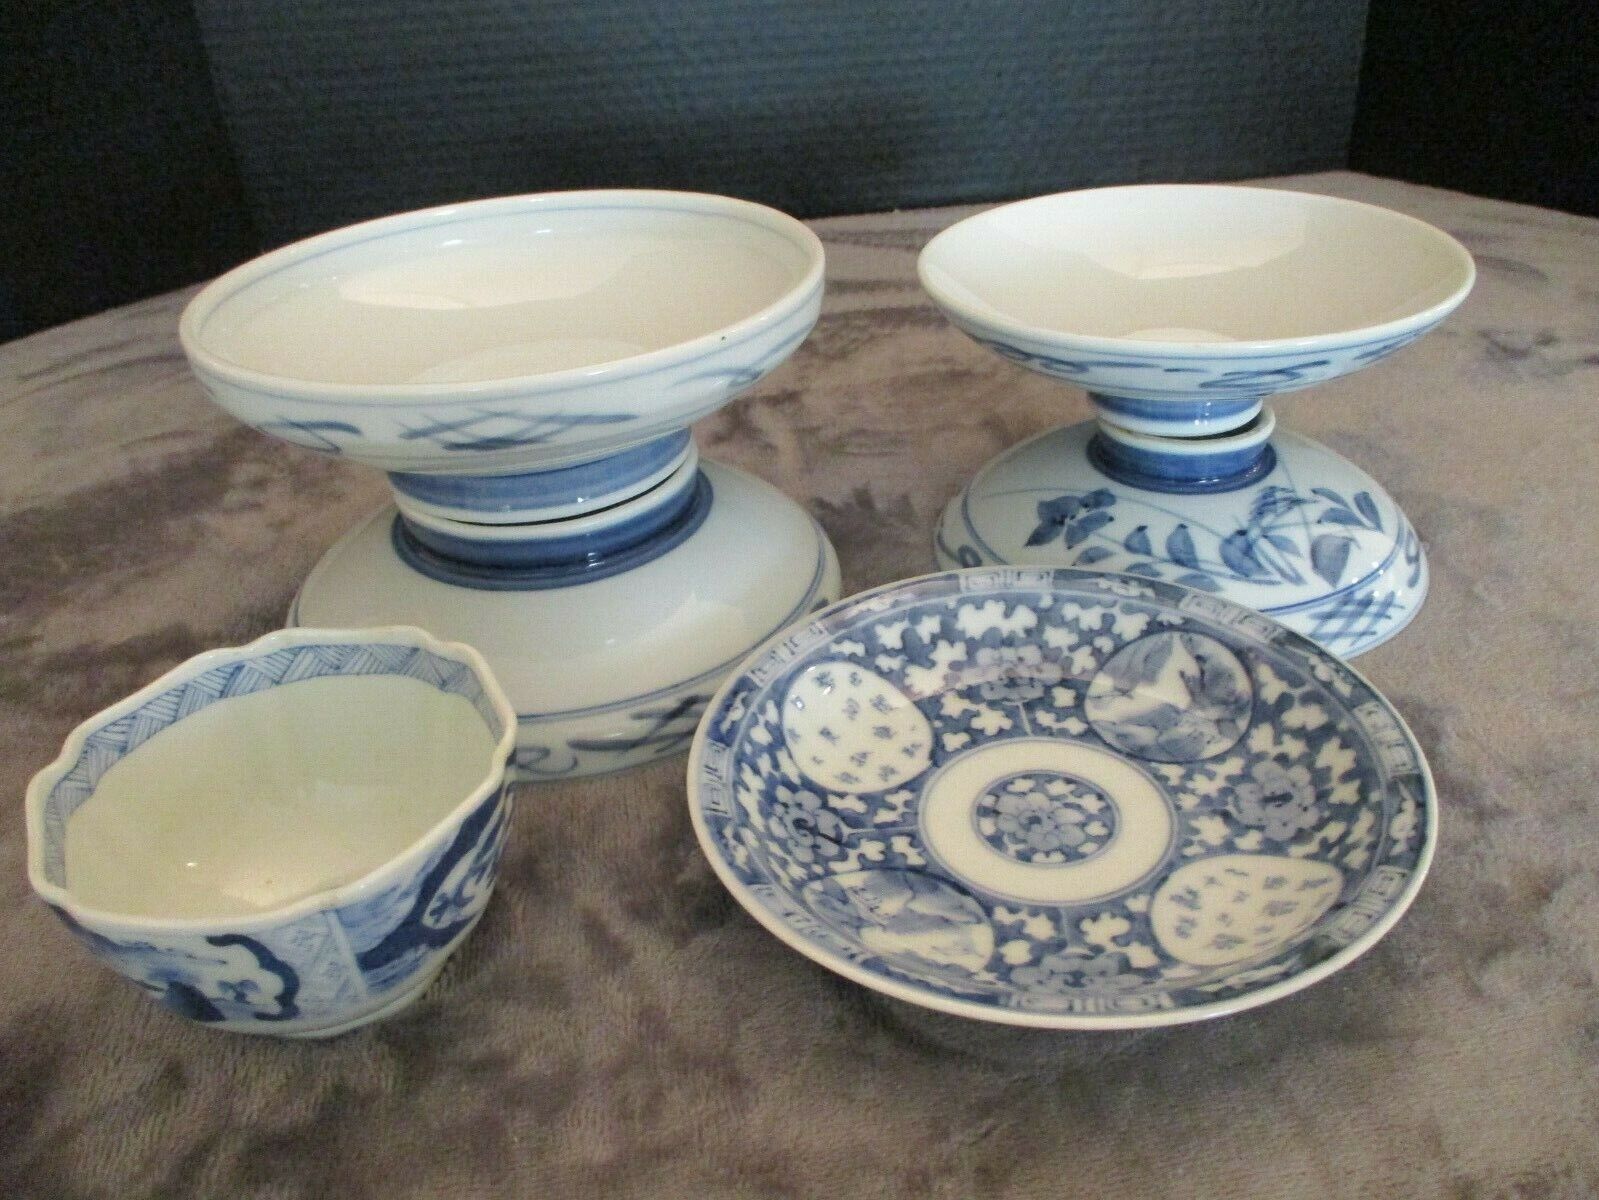 VINTAGE CHINESE 6 BLUE & WHITE COLLECTION OF BOWLS 4 DESIGNS & SHAPE SOME MARKED